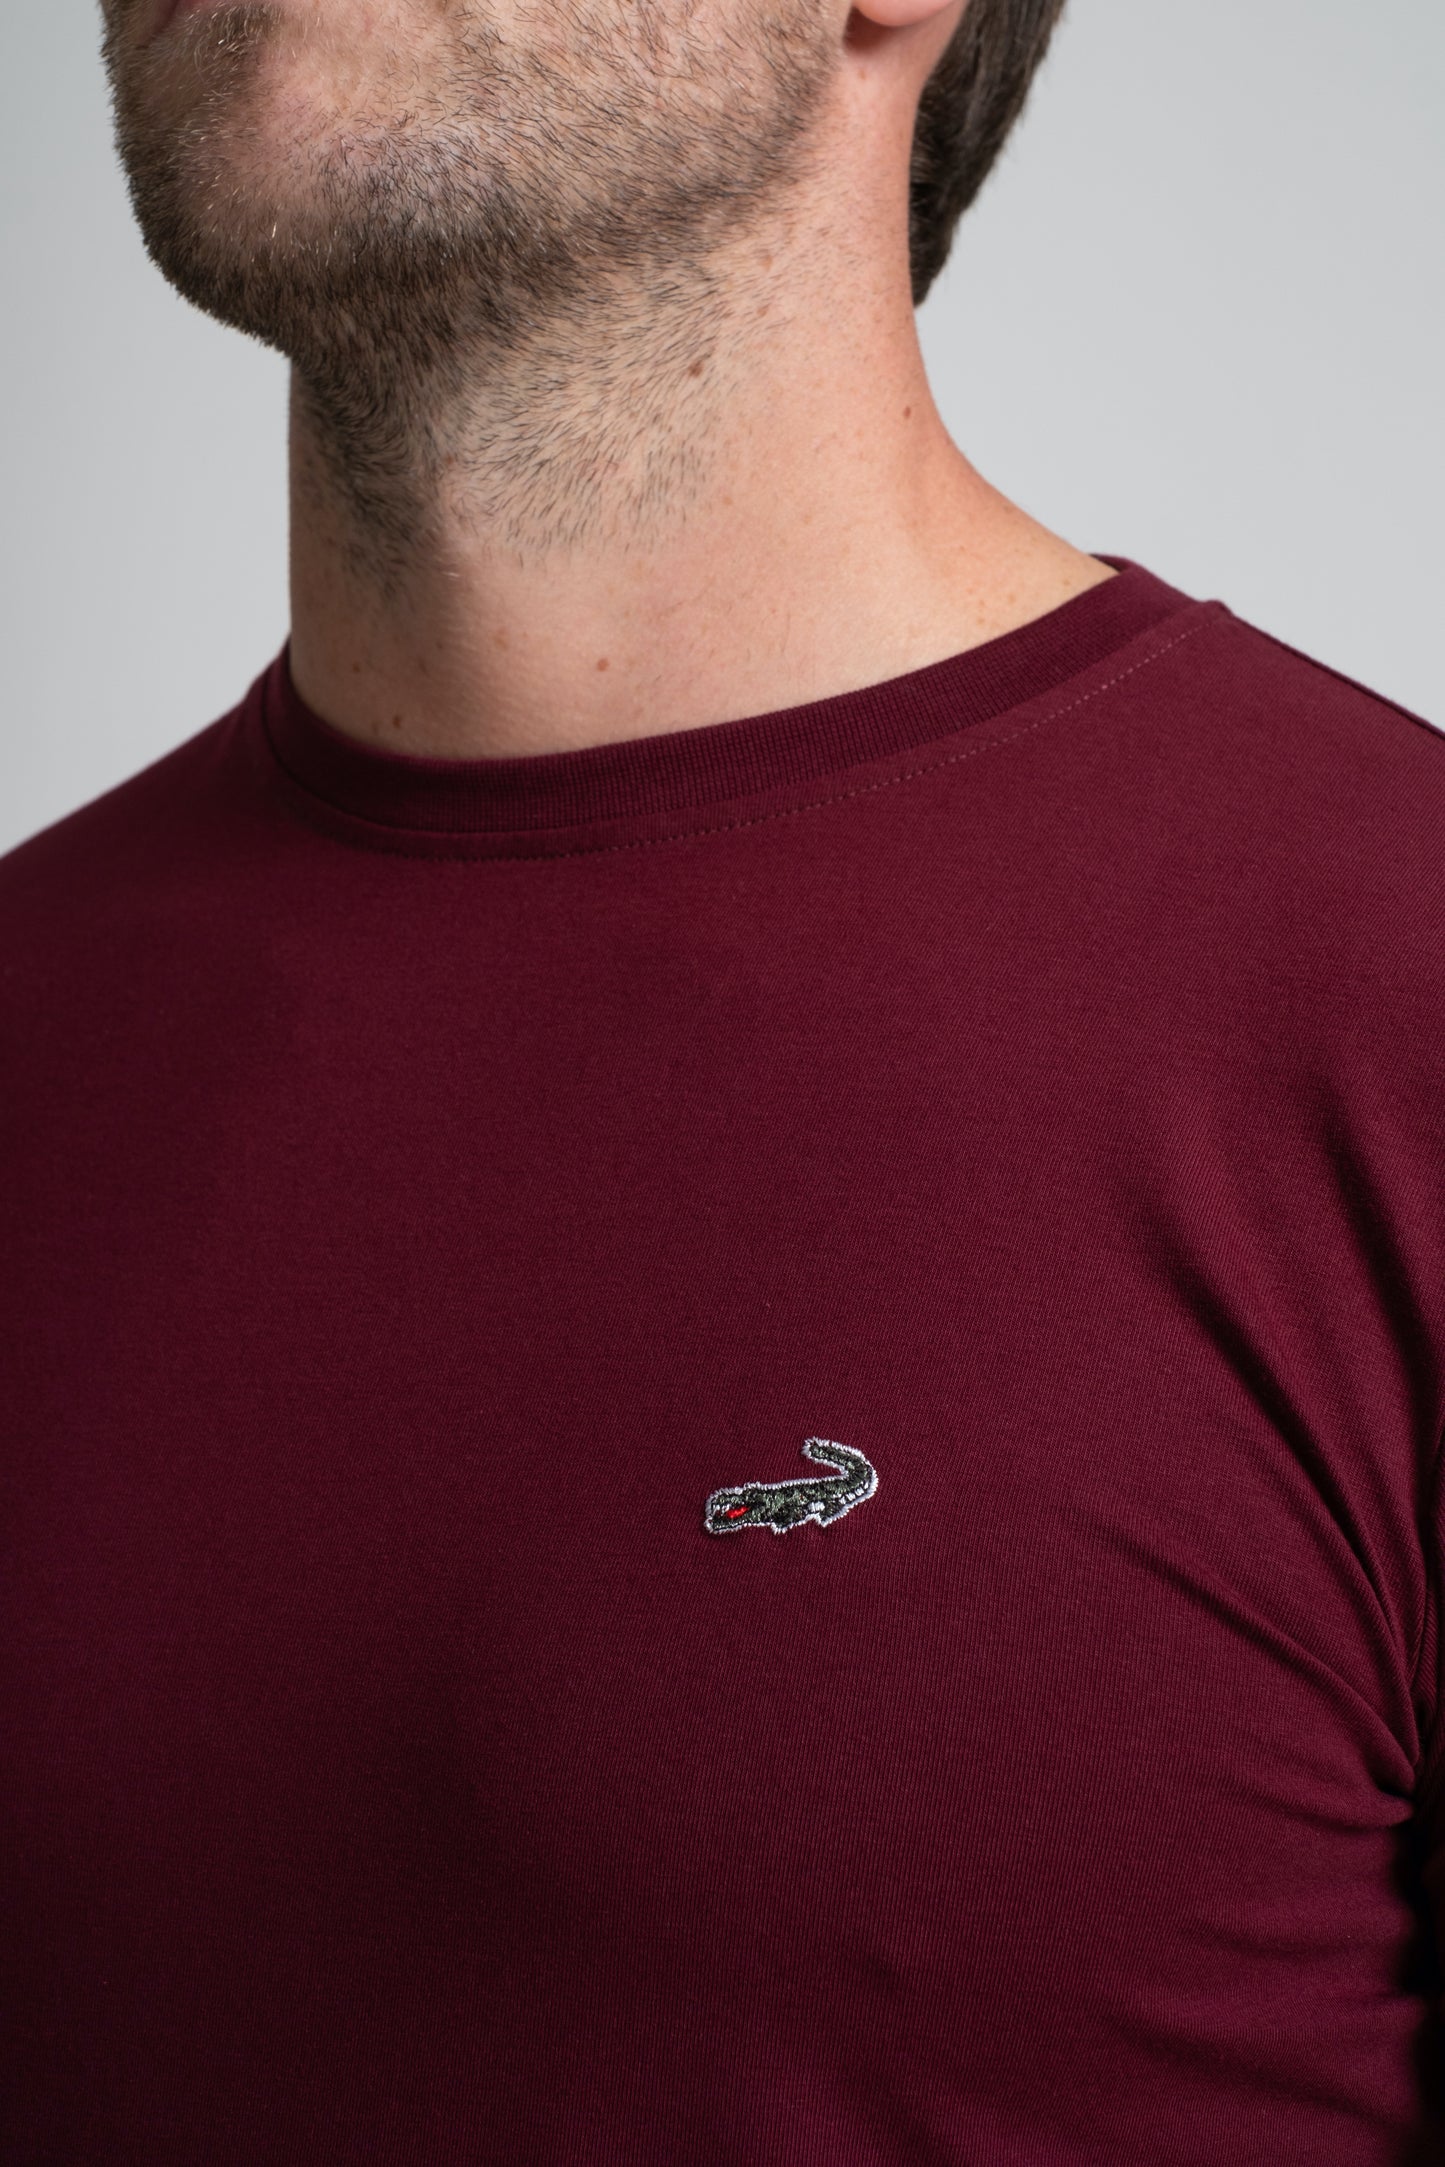 Action Fit Short sleeves-CasualCrew Neck - Windsor Wine